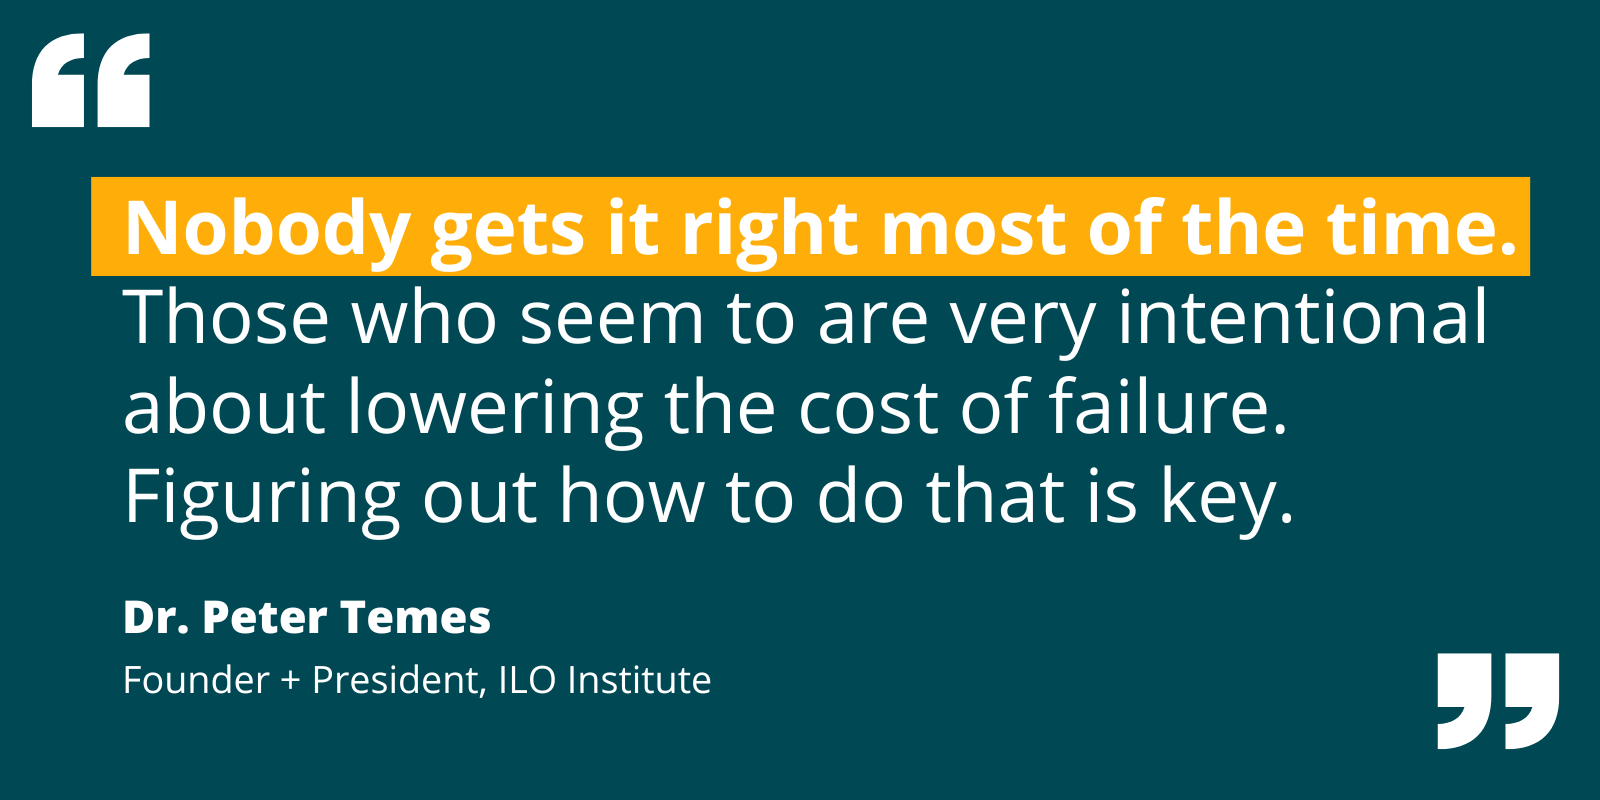 Quote by Peter Temes re: how lowering the cost of failure is more important than raising the rate of success.